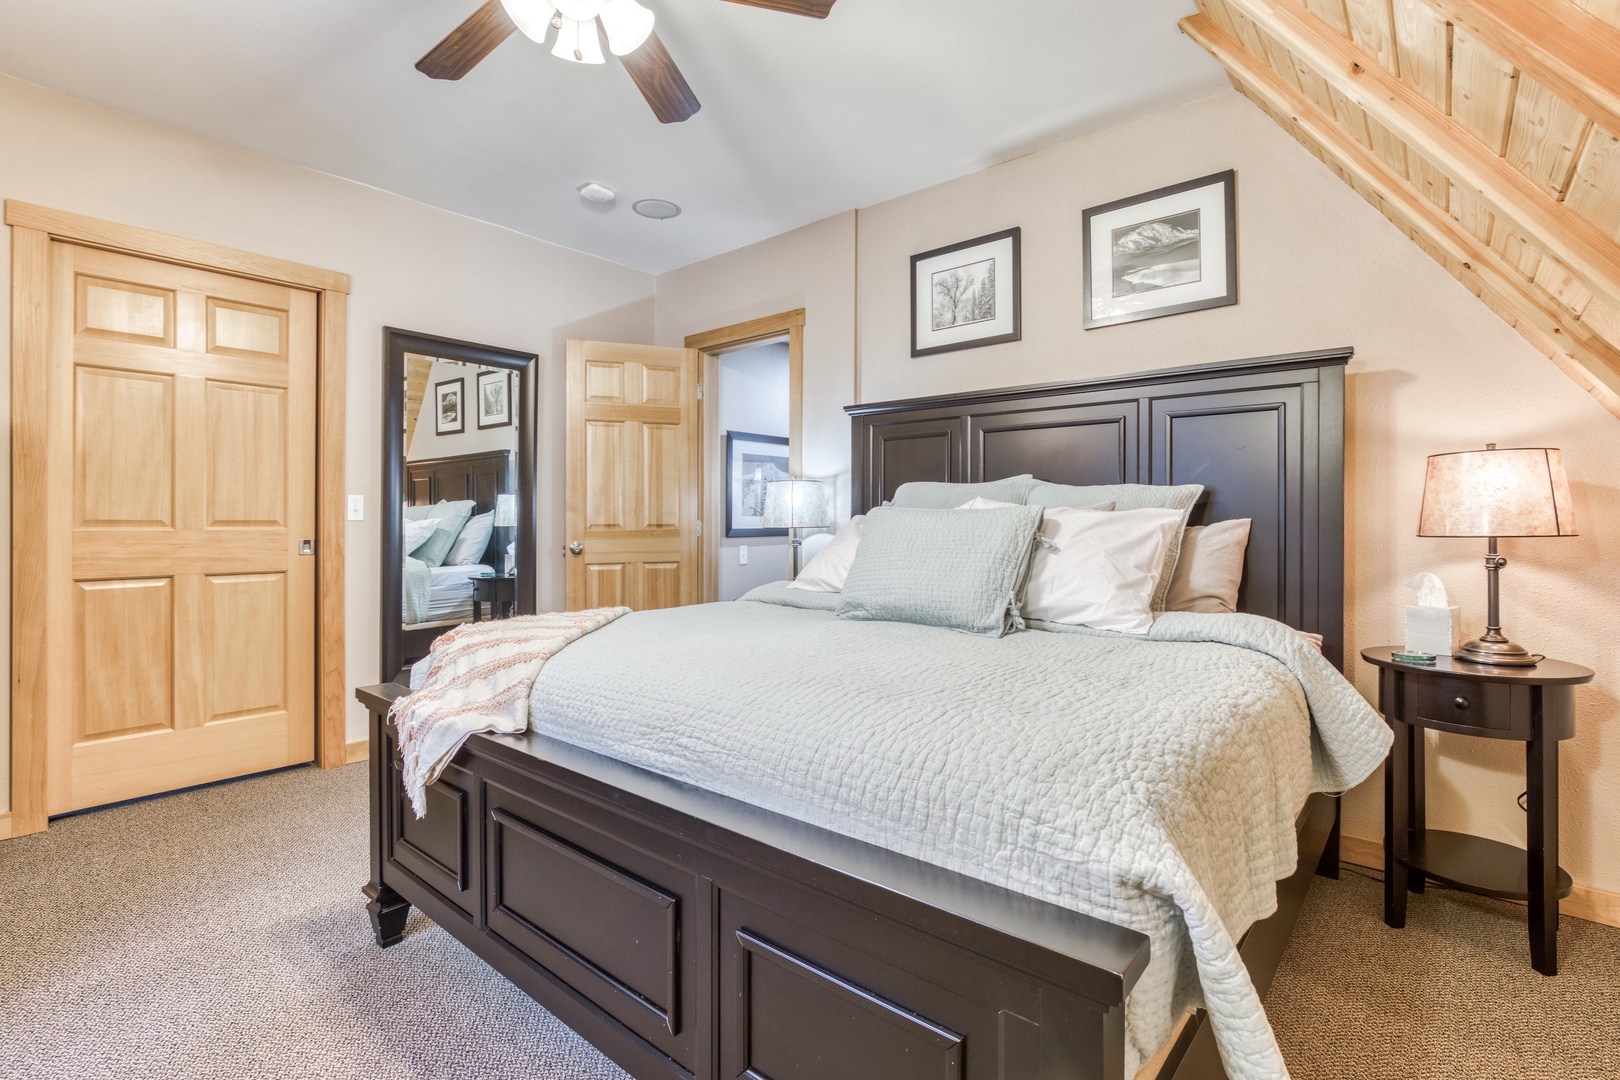 Government Camp Vacation Rentals, Glade Trail Lodge - King bed in Master bedroom